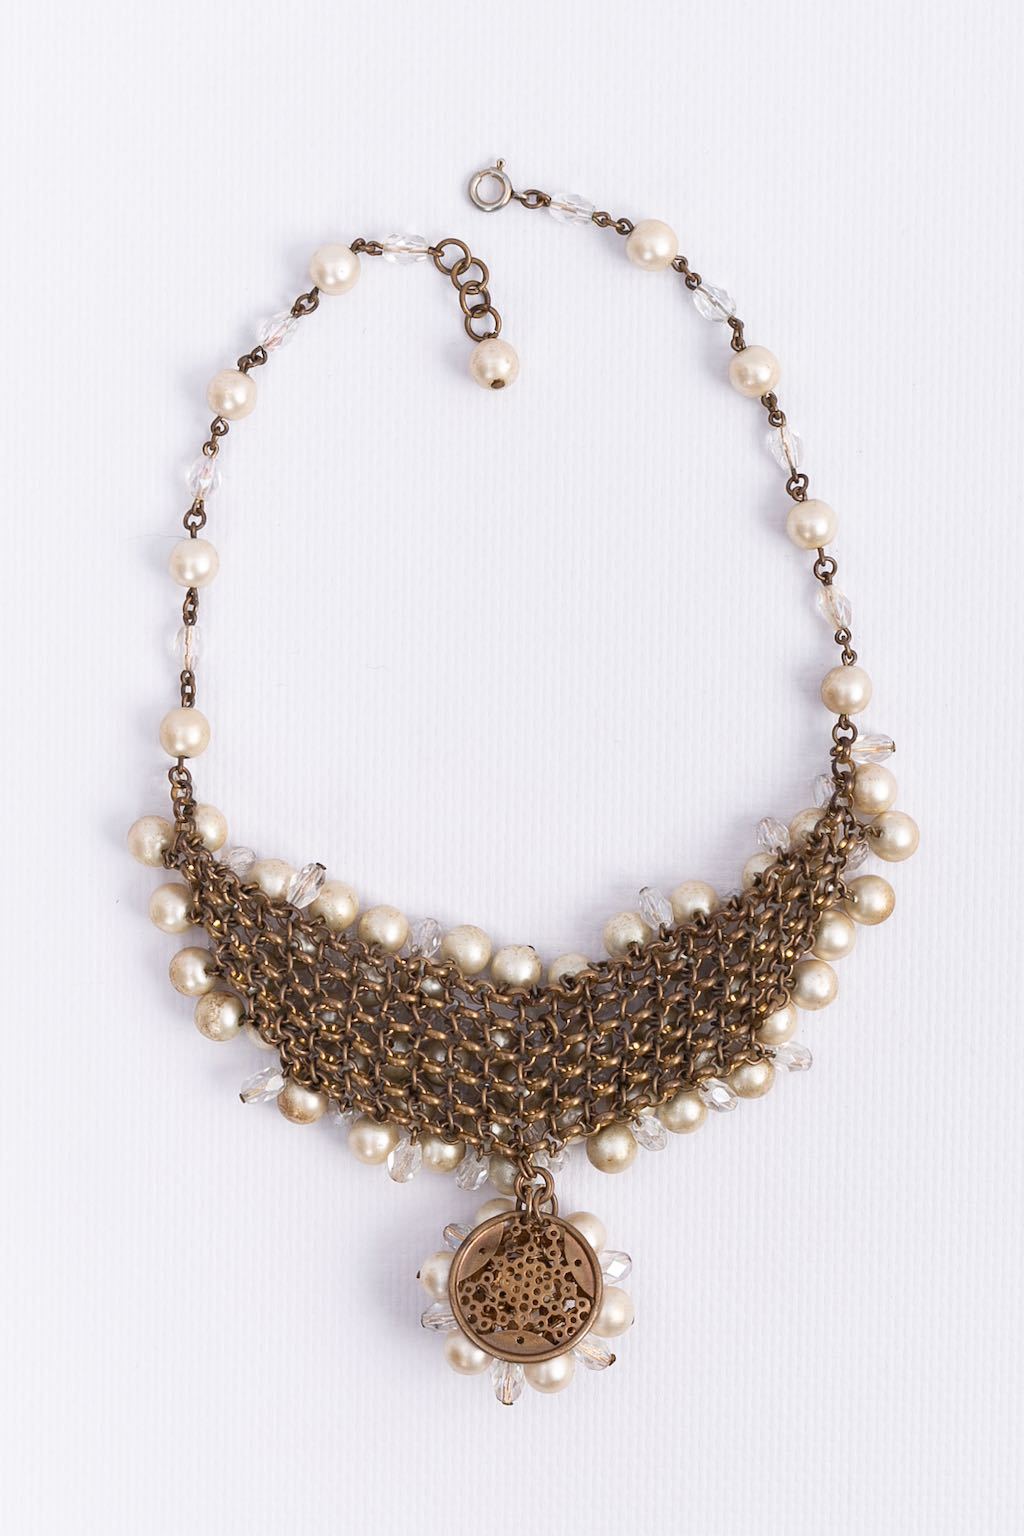 CHANEL PARIS-EGYPT HAMMERED DISC & PEARL BIB NECKLACE